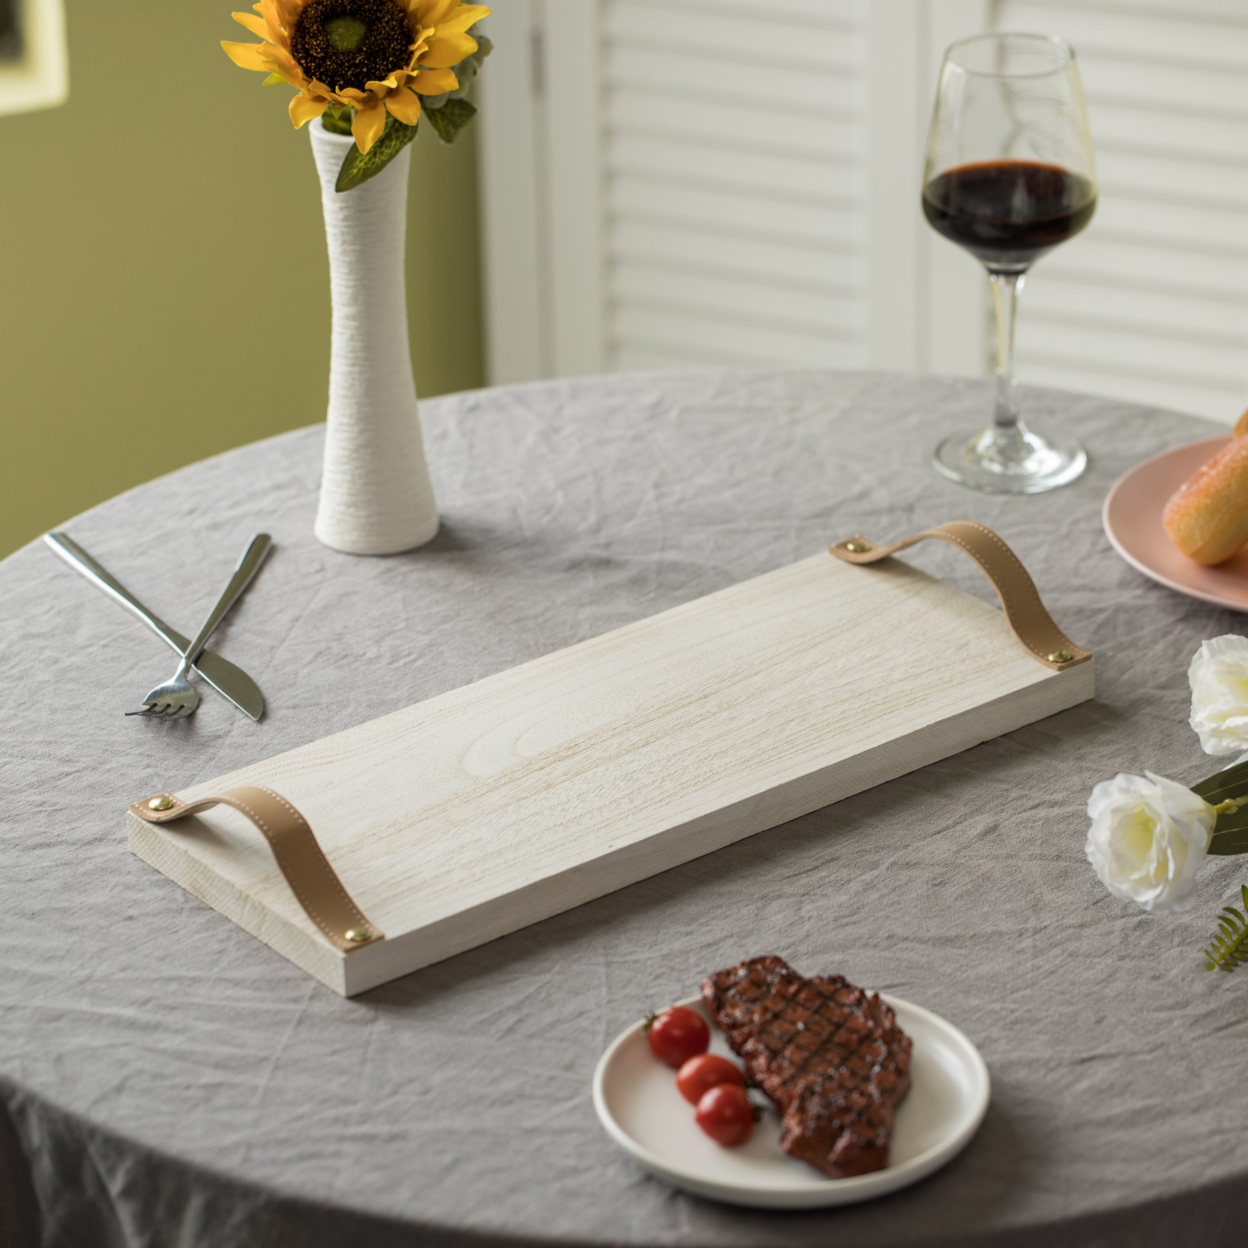 Decorative Natural Wooden Rectangular Tray Serving Board With Brown Leather Handles